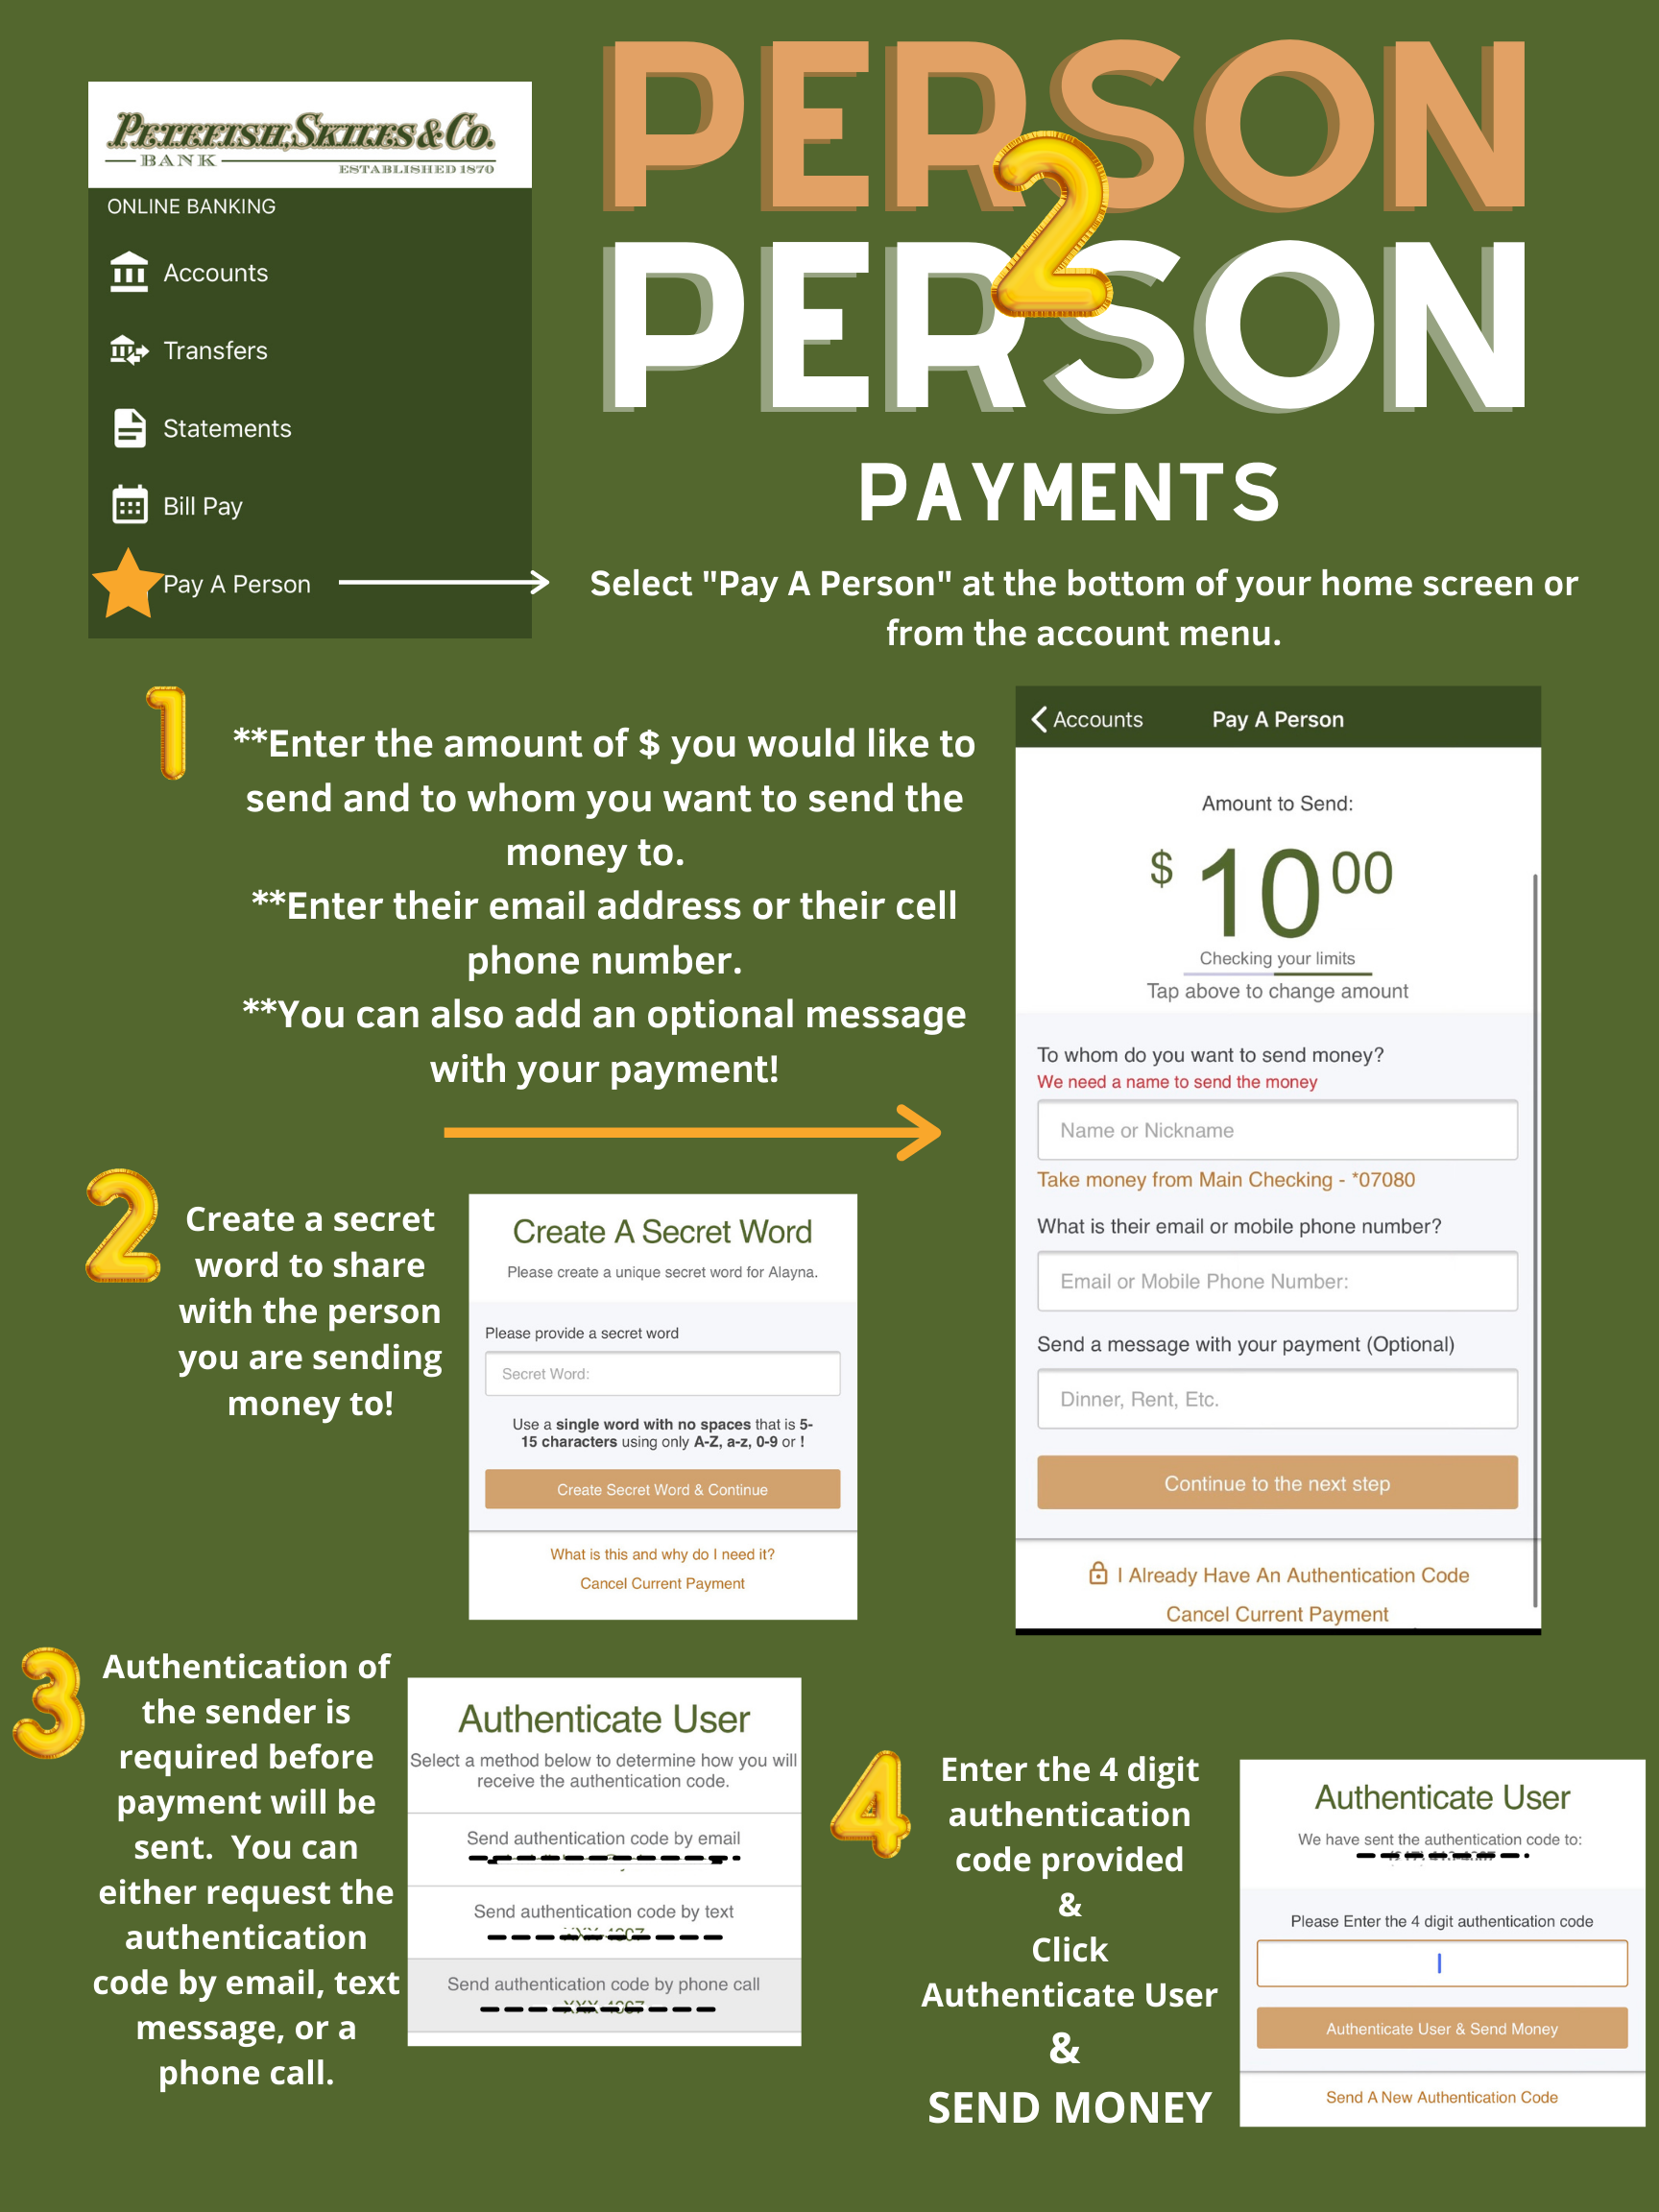 Infographic of person-to-person payments on Petefish Skiles' mobile banking app.